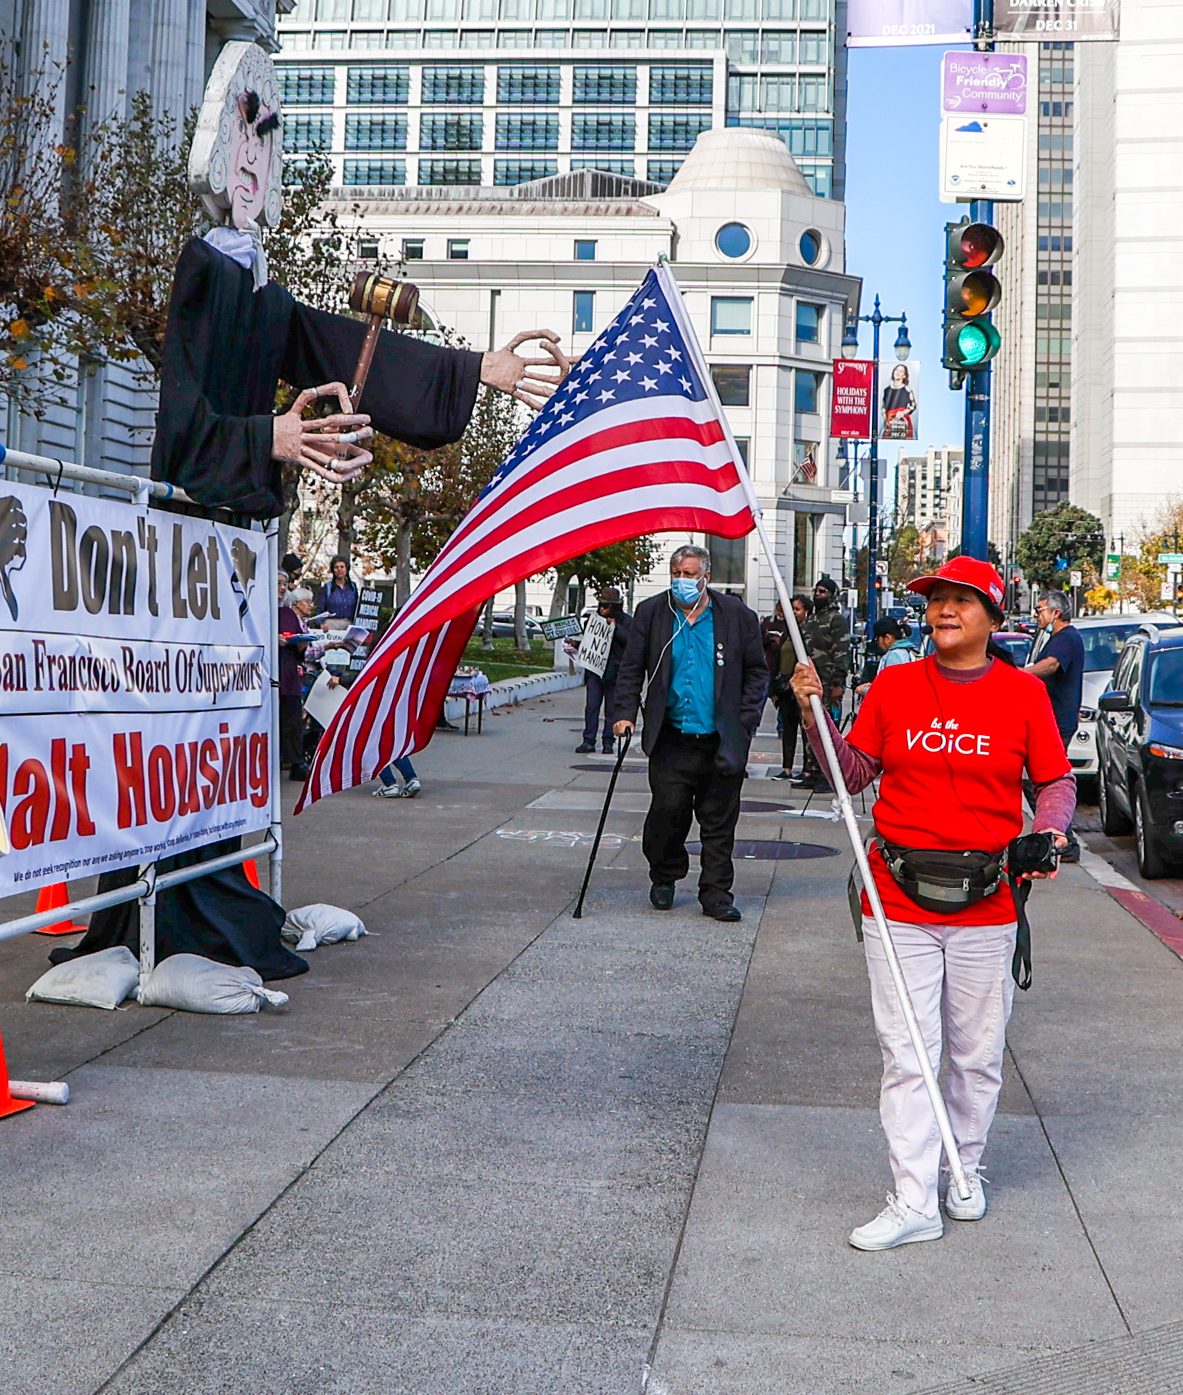 A protest scene with a person holding a large U.S. flag next to a giant puppet judge, and a banner about housing.